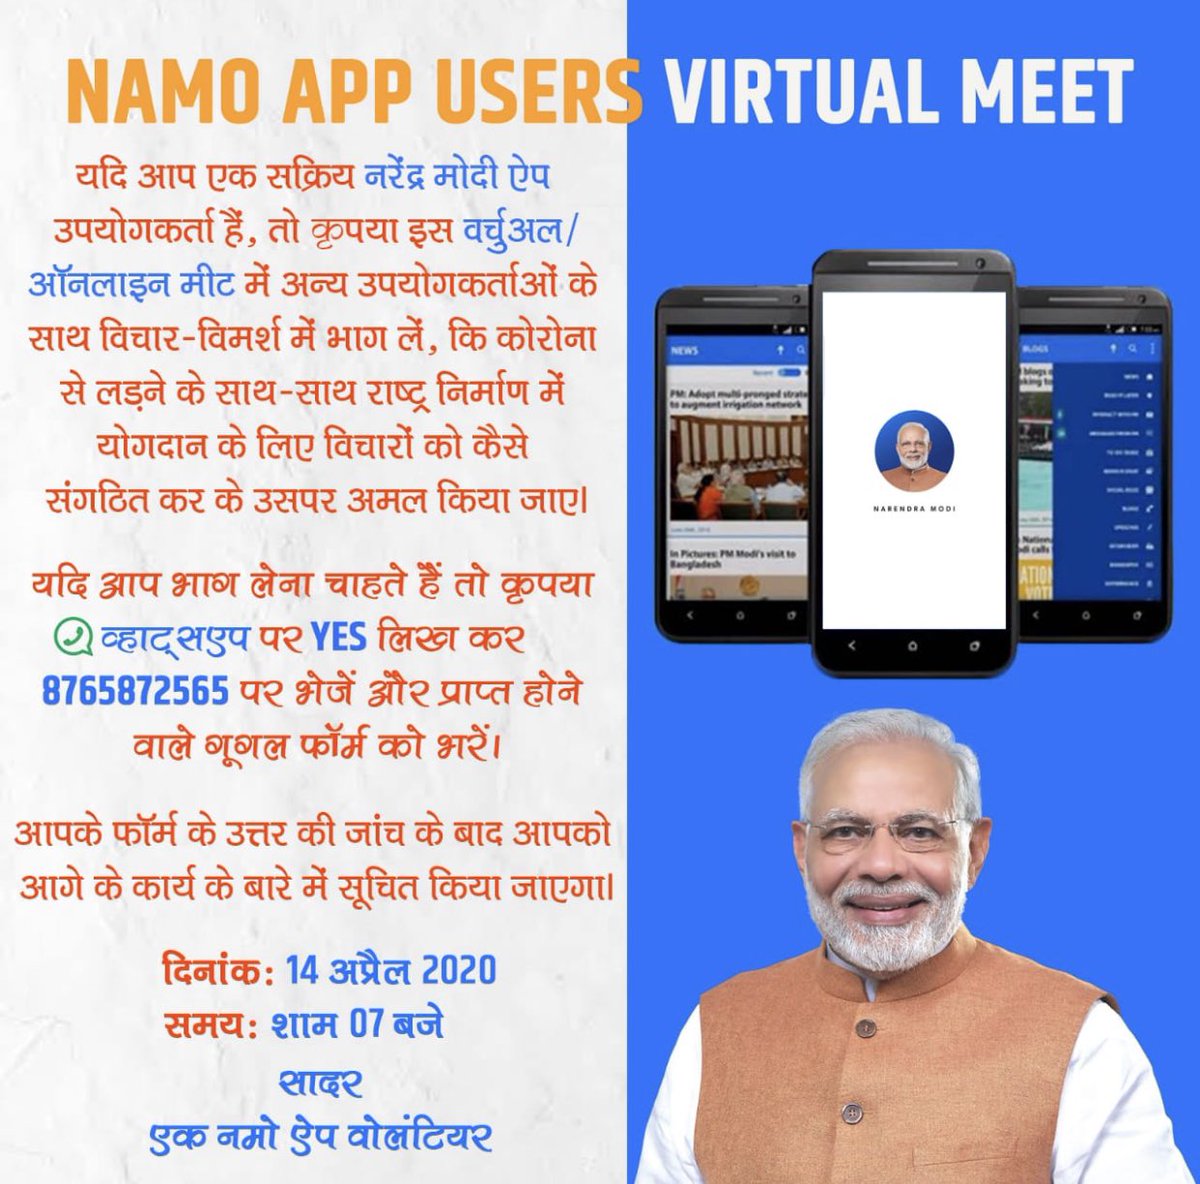 'NAMO APP USERS VIRTUAL MEET'

If you are an active NarendraModi app user please do participate in this virtualmeet with other users to brainstorm upon how to pool ideas to contribute towards fighting Corona as well as nation building.
#NaMoApp @narendramodi @NamoApp @ModiBharosa